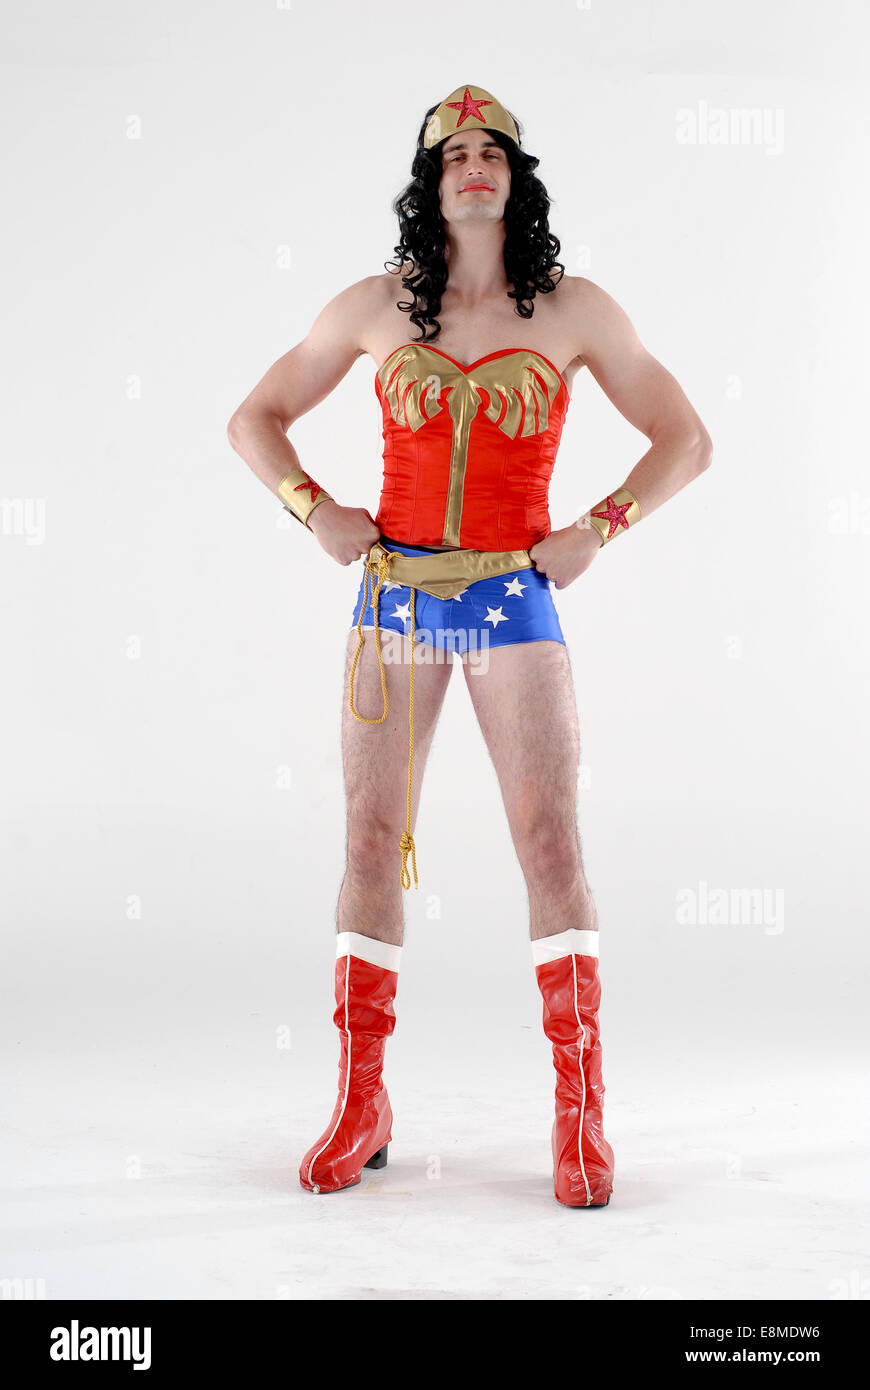 man in fancy dress comedy costume in a DC comics wonder woman super hero outfit, with red boots, hot pants, wig and red top Stock Photo